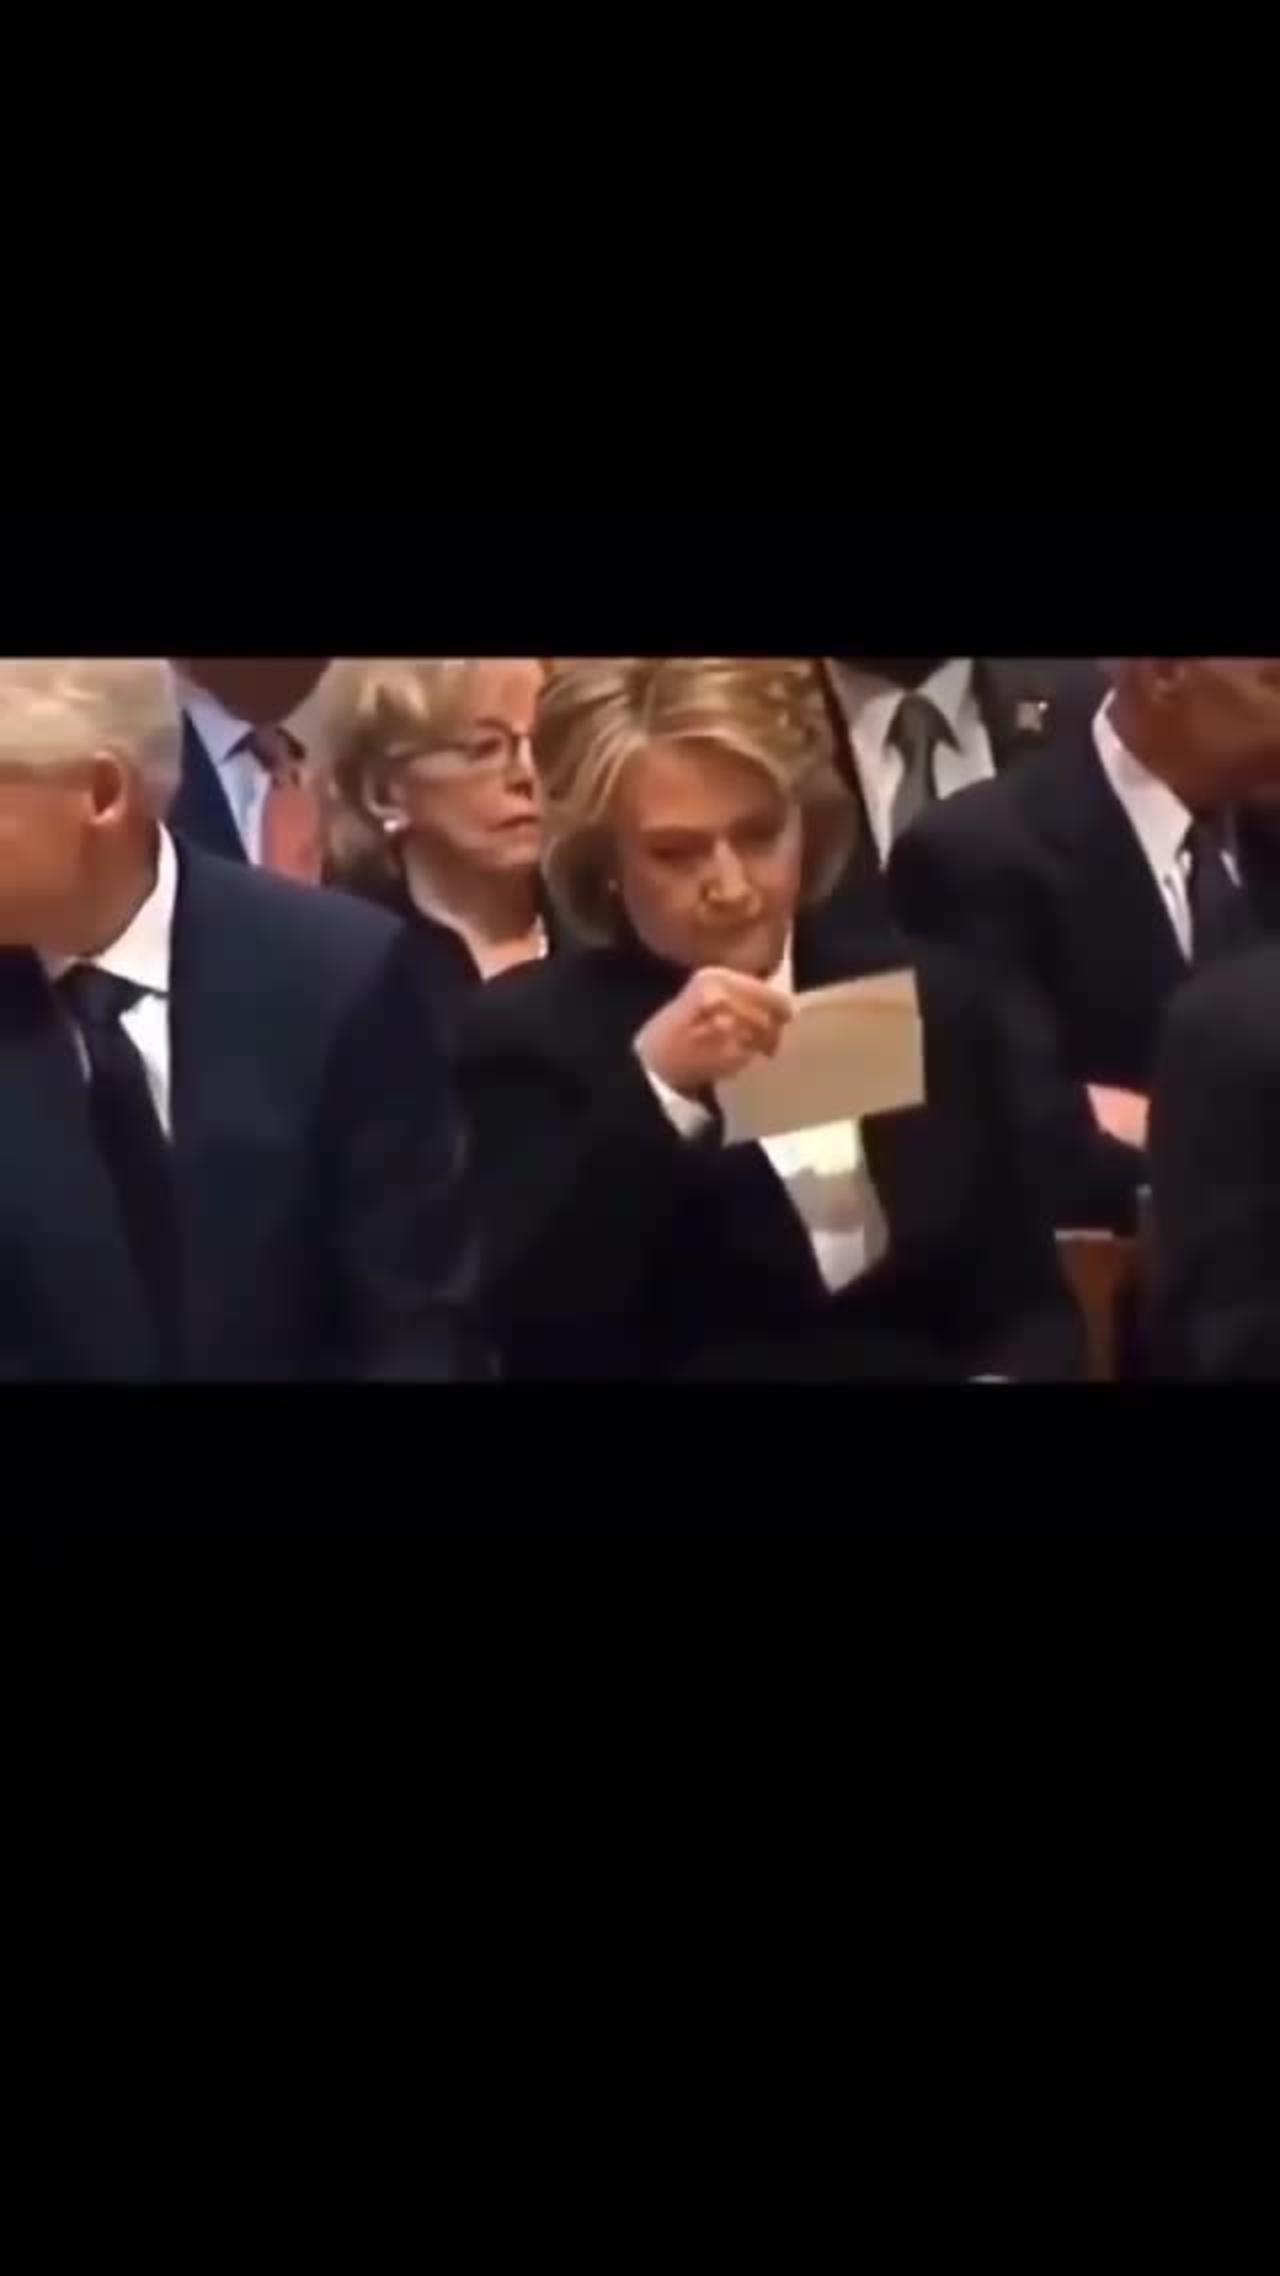 Envelopes at Bush funeral opened reactions from the demonic recipients.